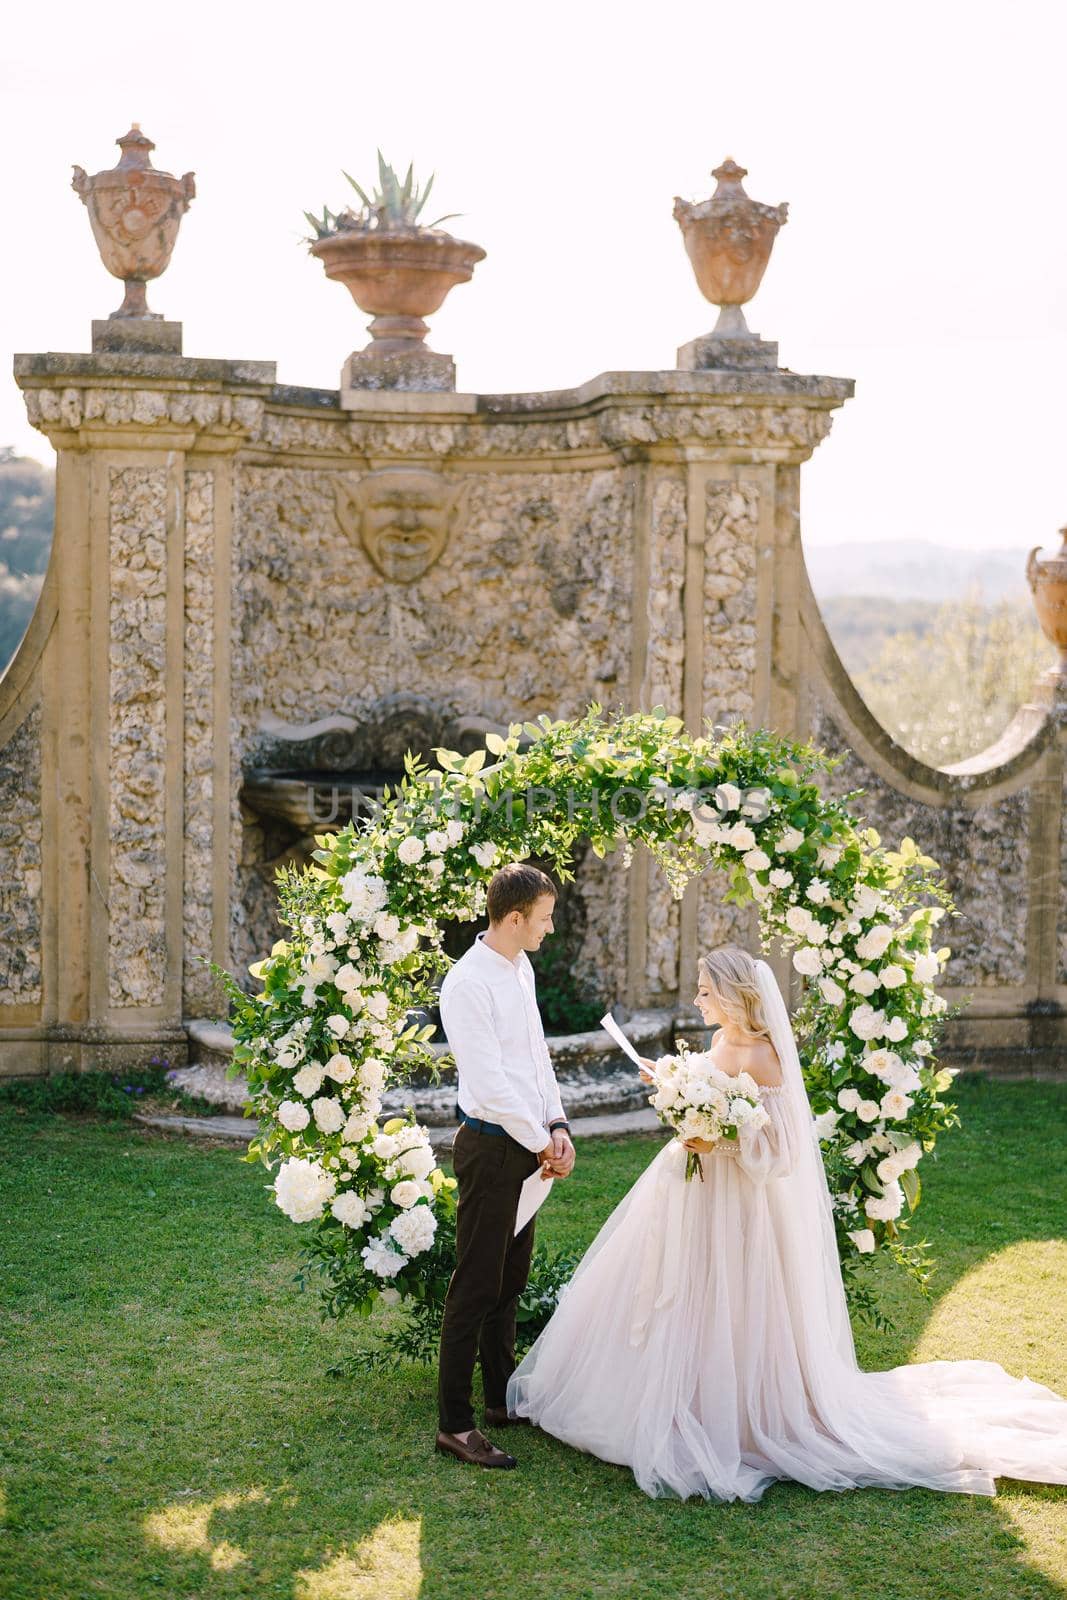 Wedding at an old winery villa in Tuscany, Italy. Round wedding arch decorated with white flowers and greenery in front of an ancient Italian architecture. The bride reads out the wedding vows.